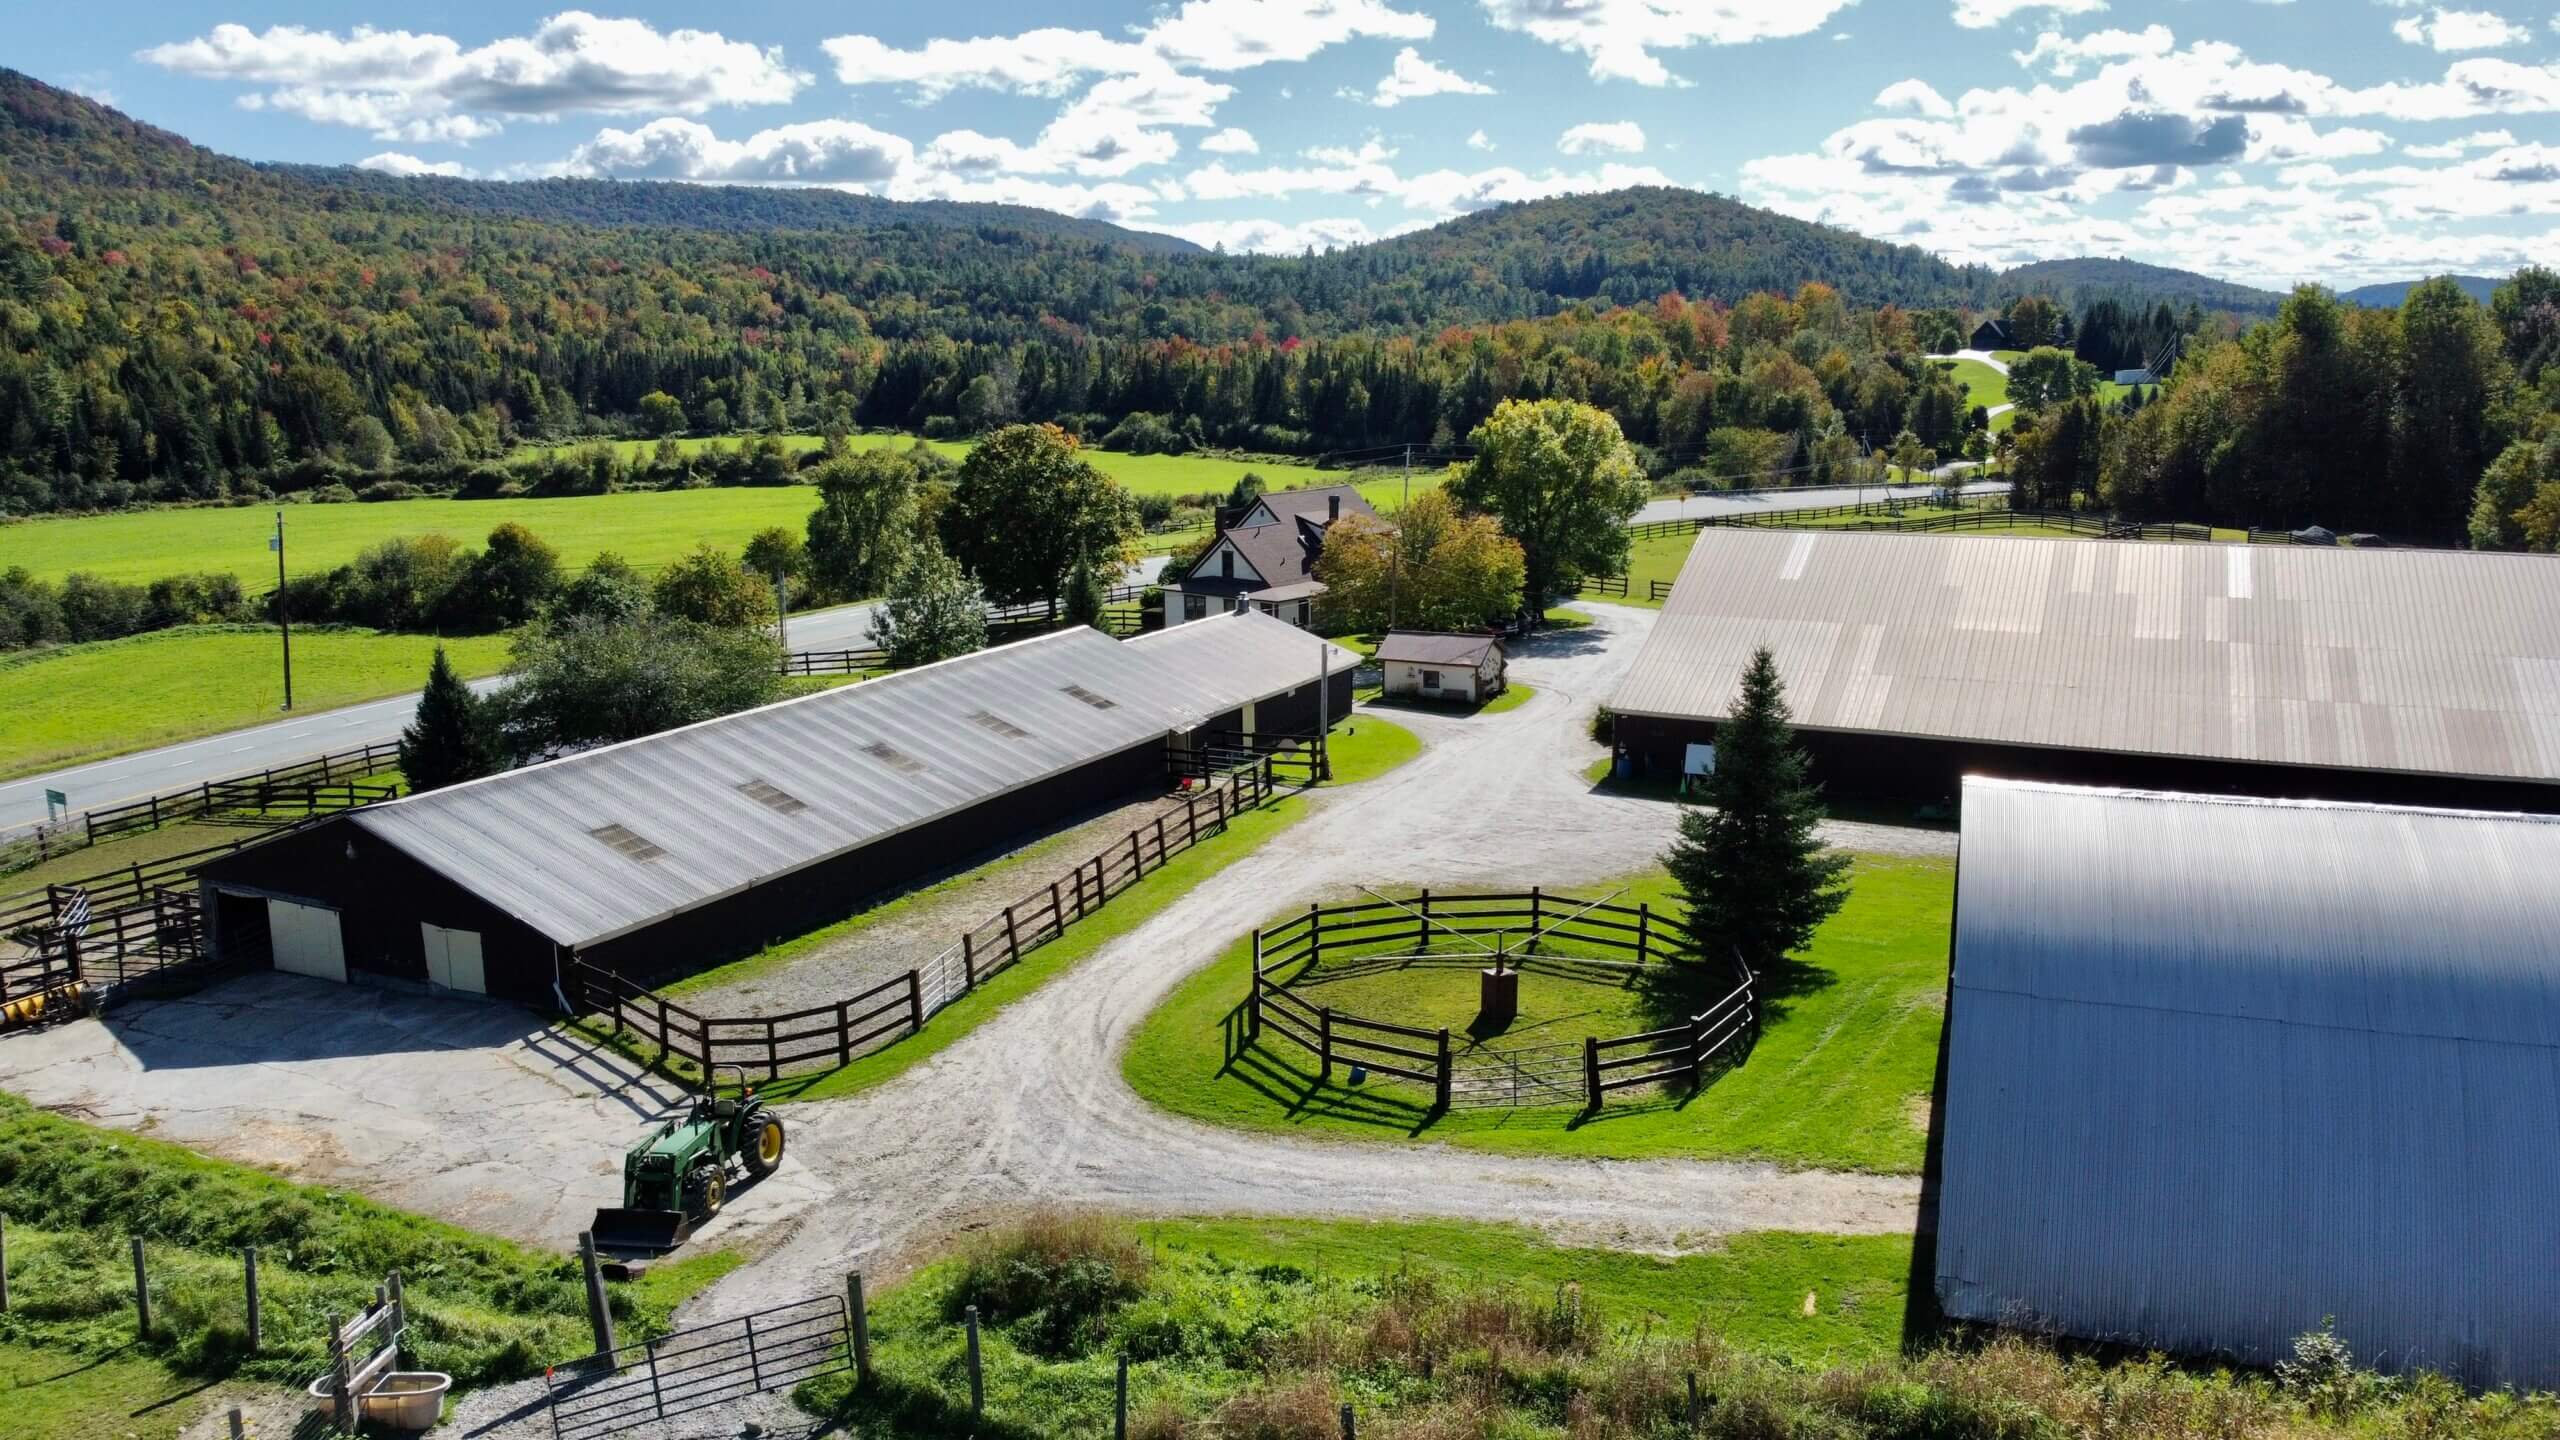 The new home of Three Fold Farm has 27 stalls in two barns, an indoor and 70 acres which includes trails throughout the property.